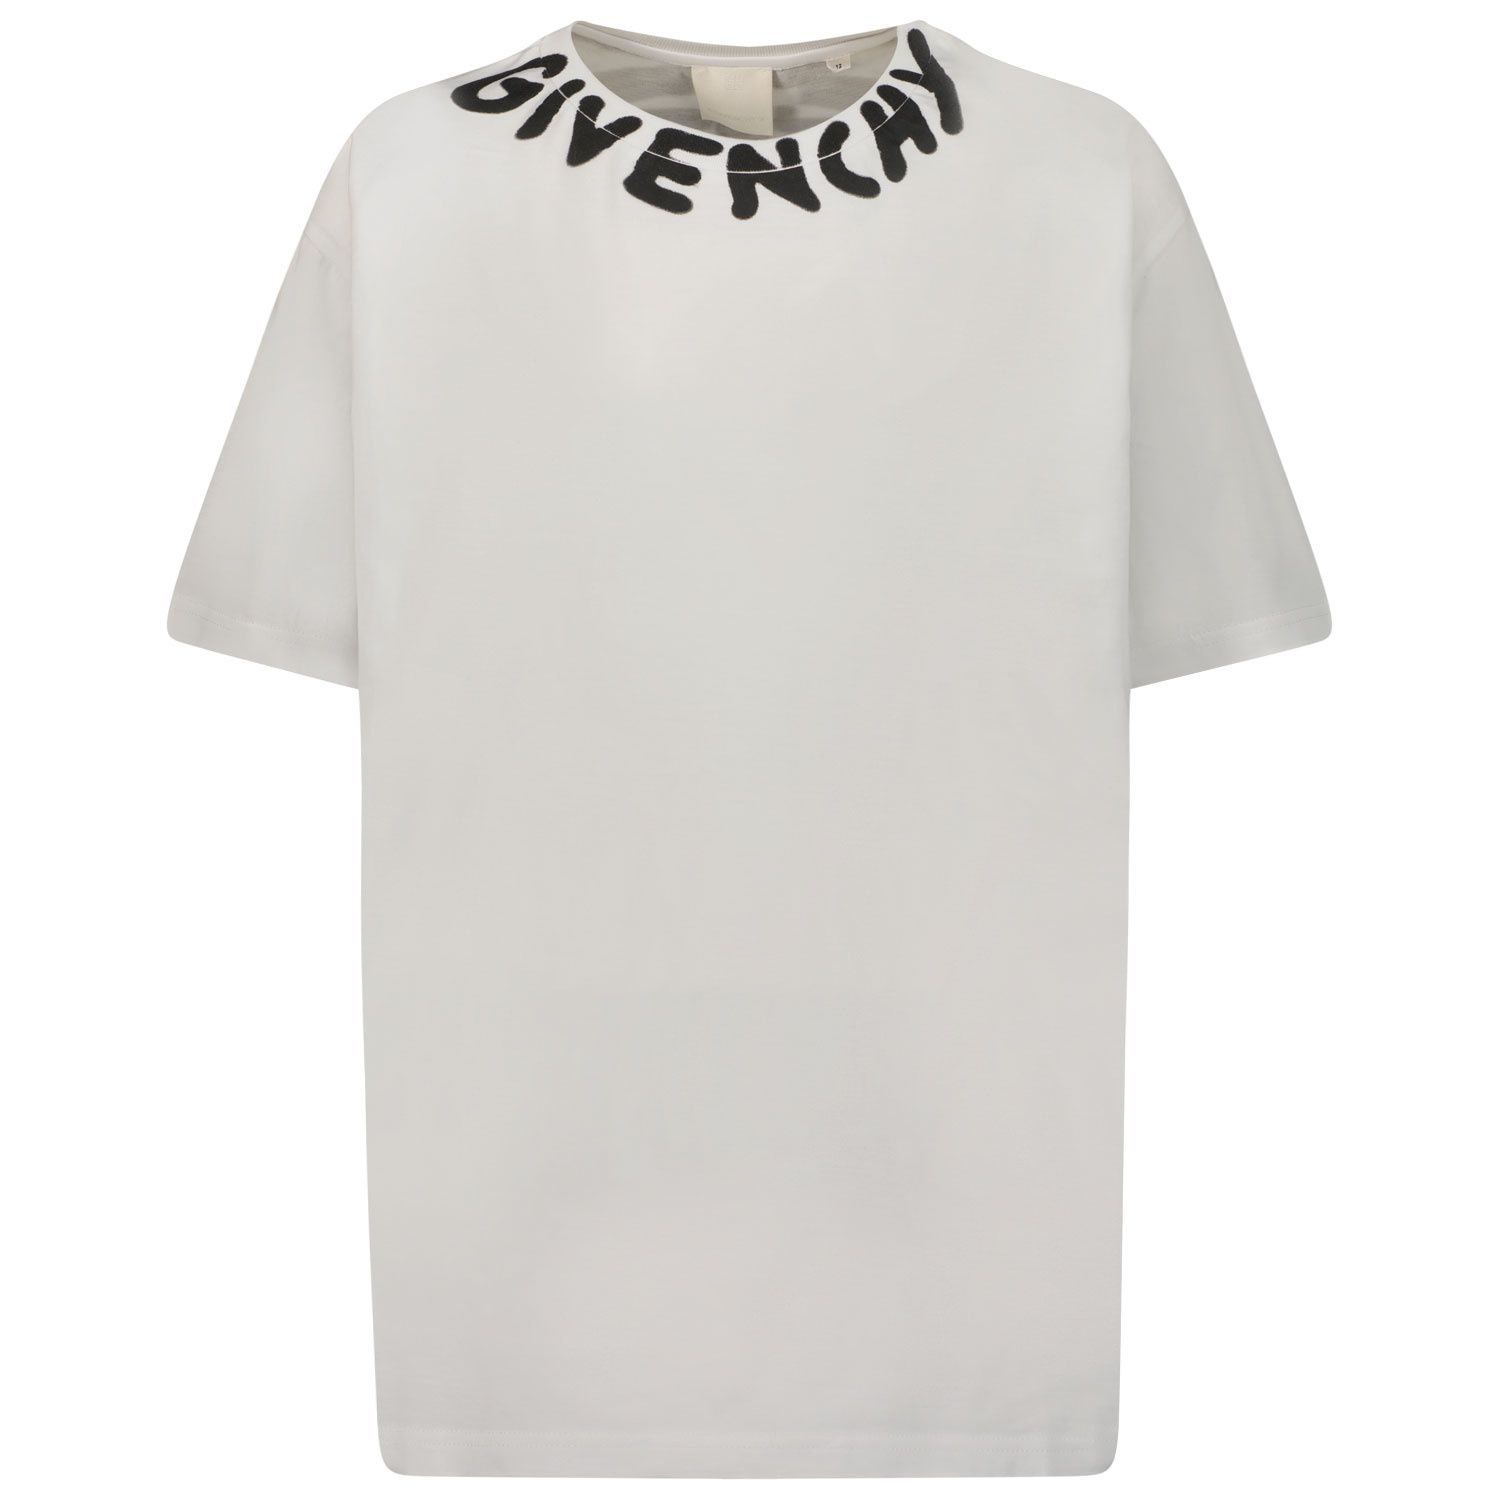 Picture of Givenchy H25387 kids t-shirt white